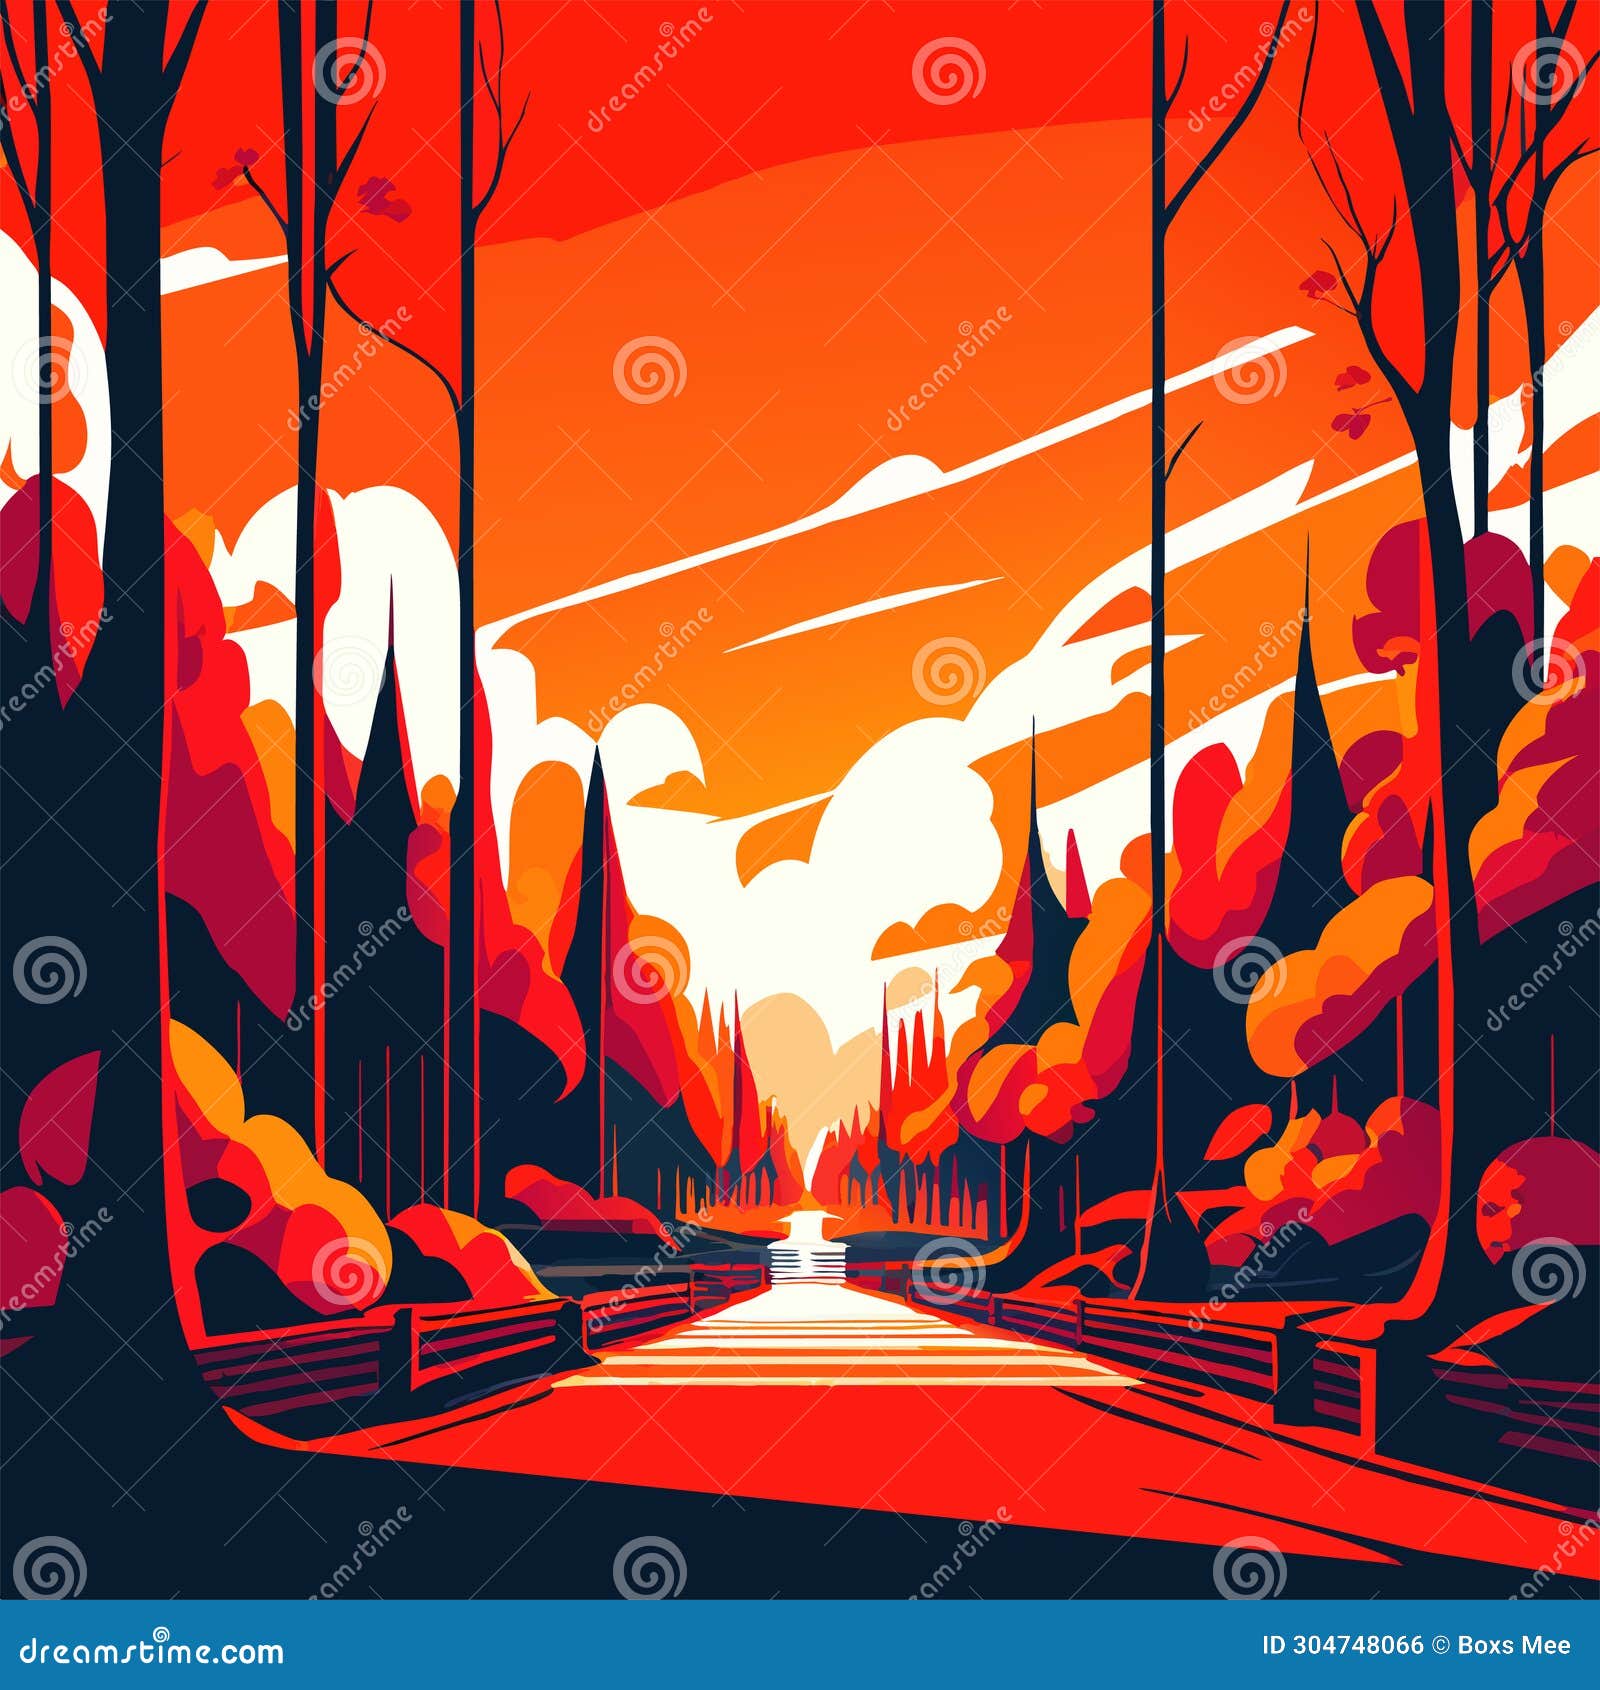 Autumn Landscape with Road and Trees. Vector Illustration in Cartoon ...